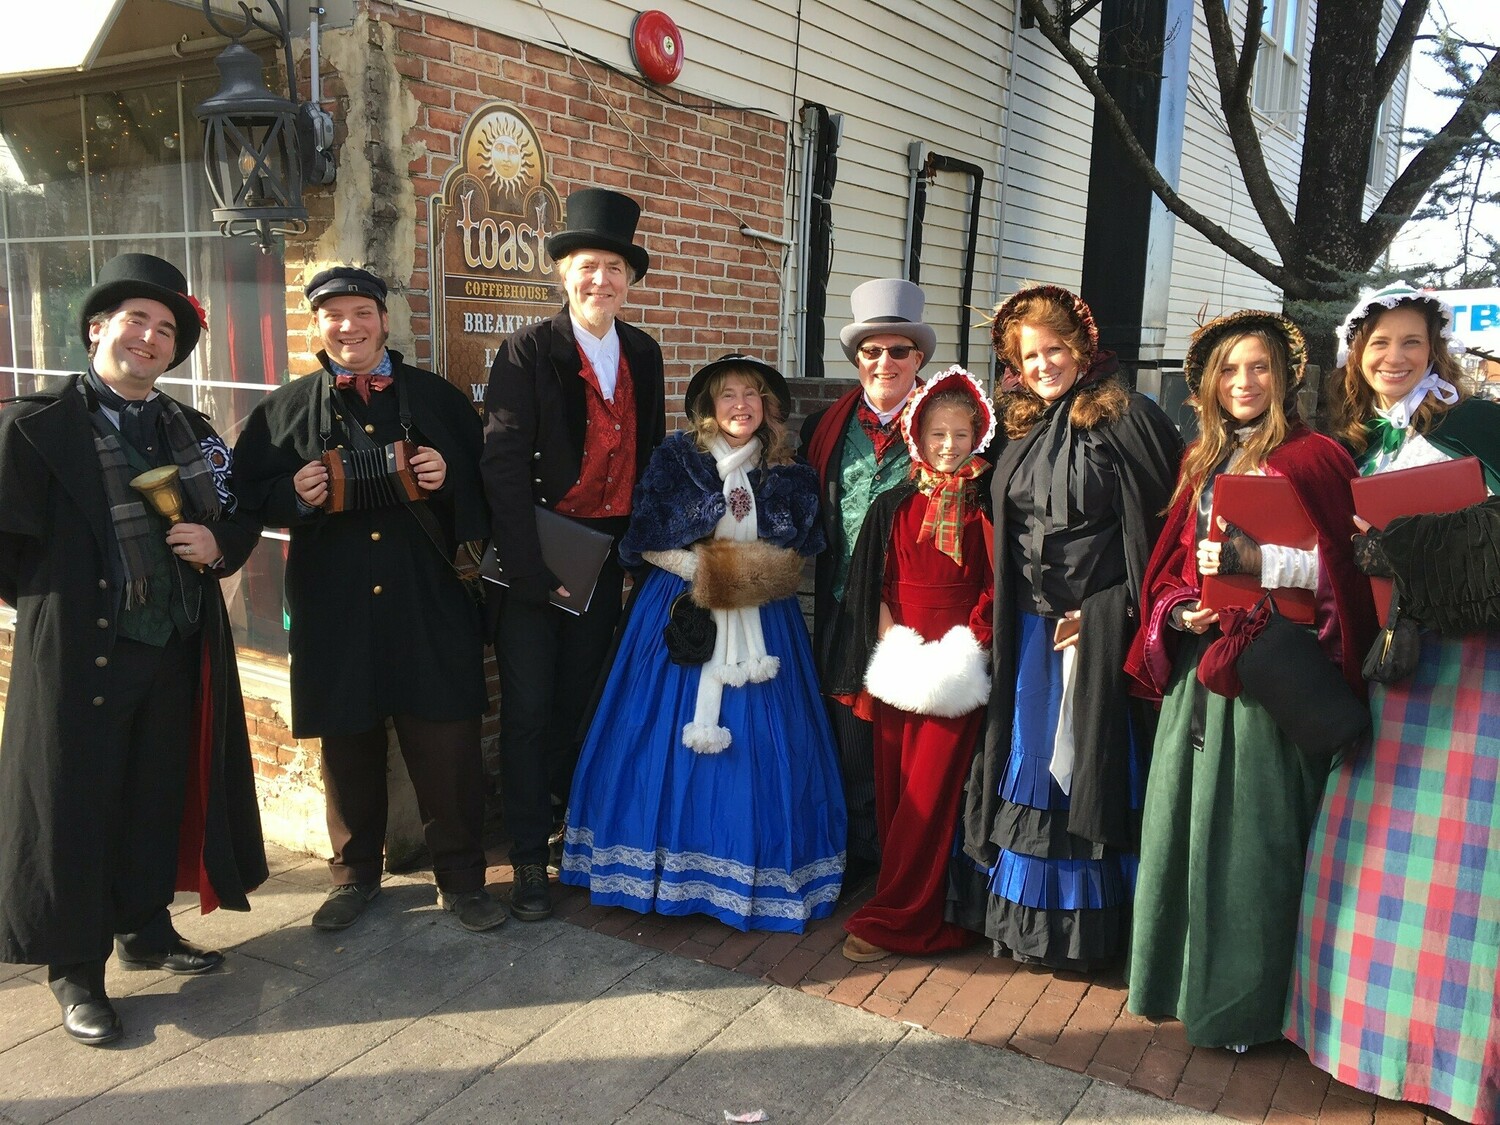 The Dickens Carolers will make their way from the Sag Harbor Historical Society to the lighting of the Christmas tree on Long Wharf in Sag Harbor on December 2.